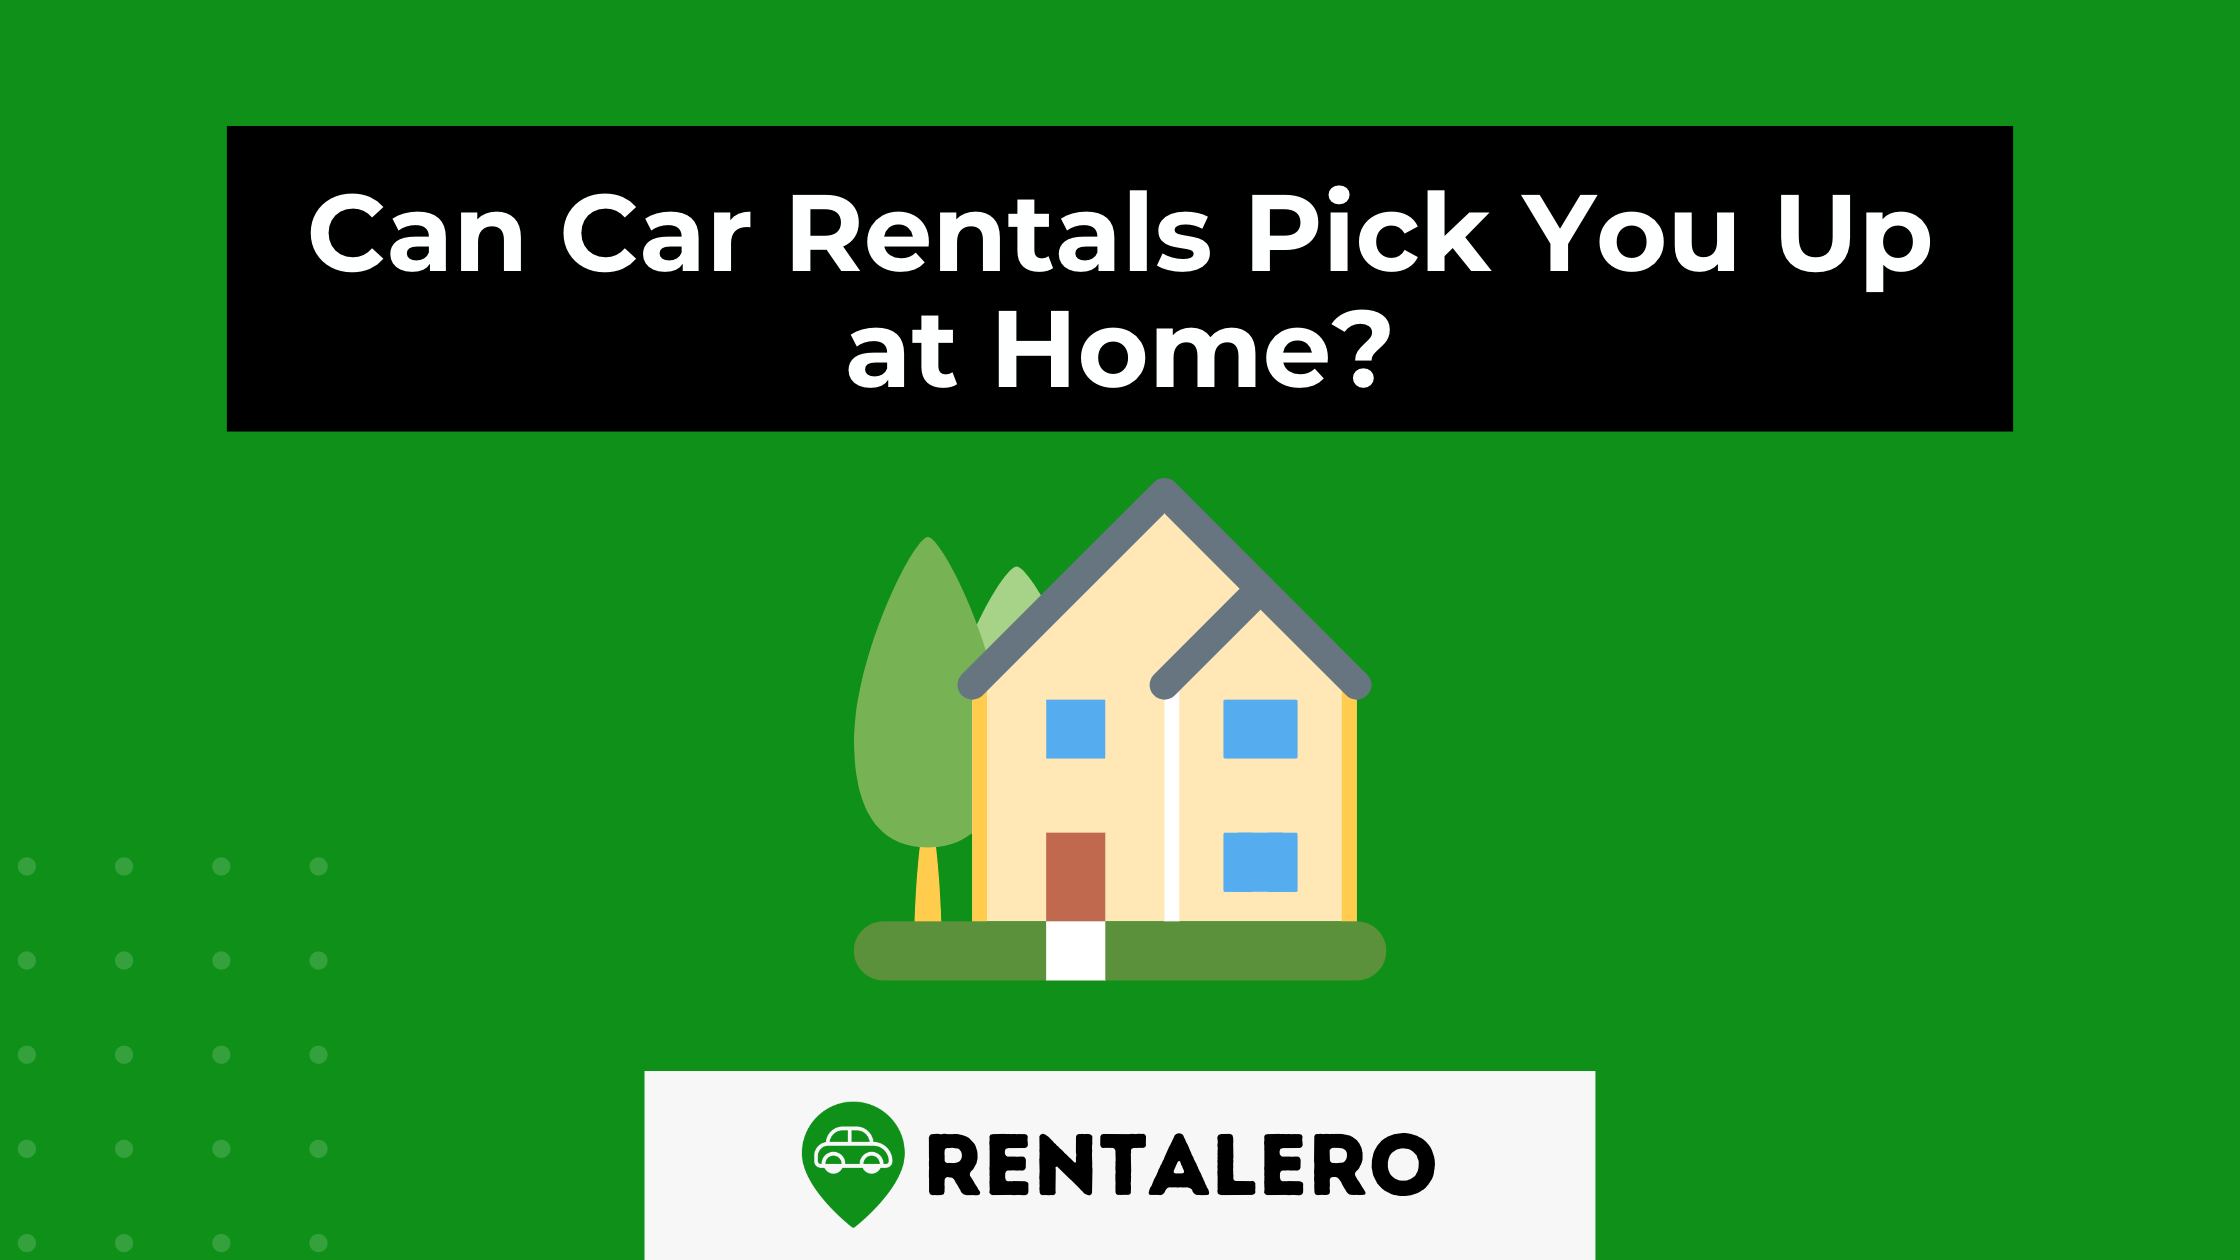 Can Car Rentals Pick You Up at Home? Yes, but...